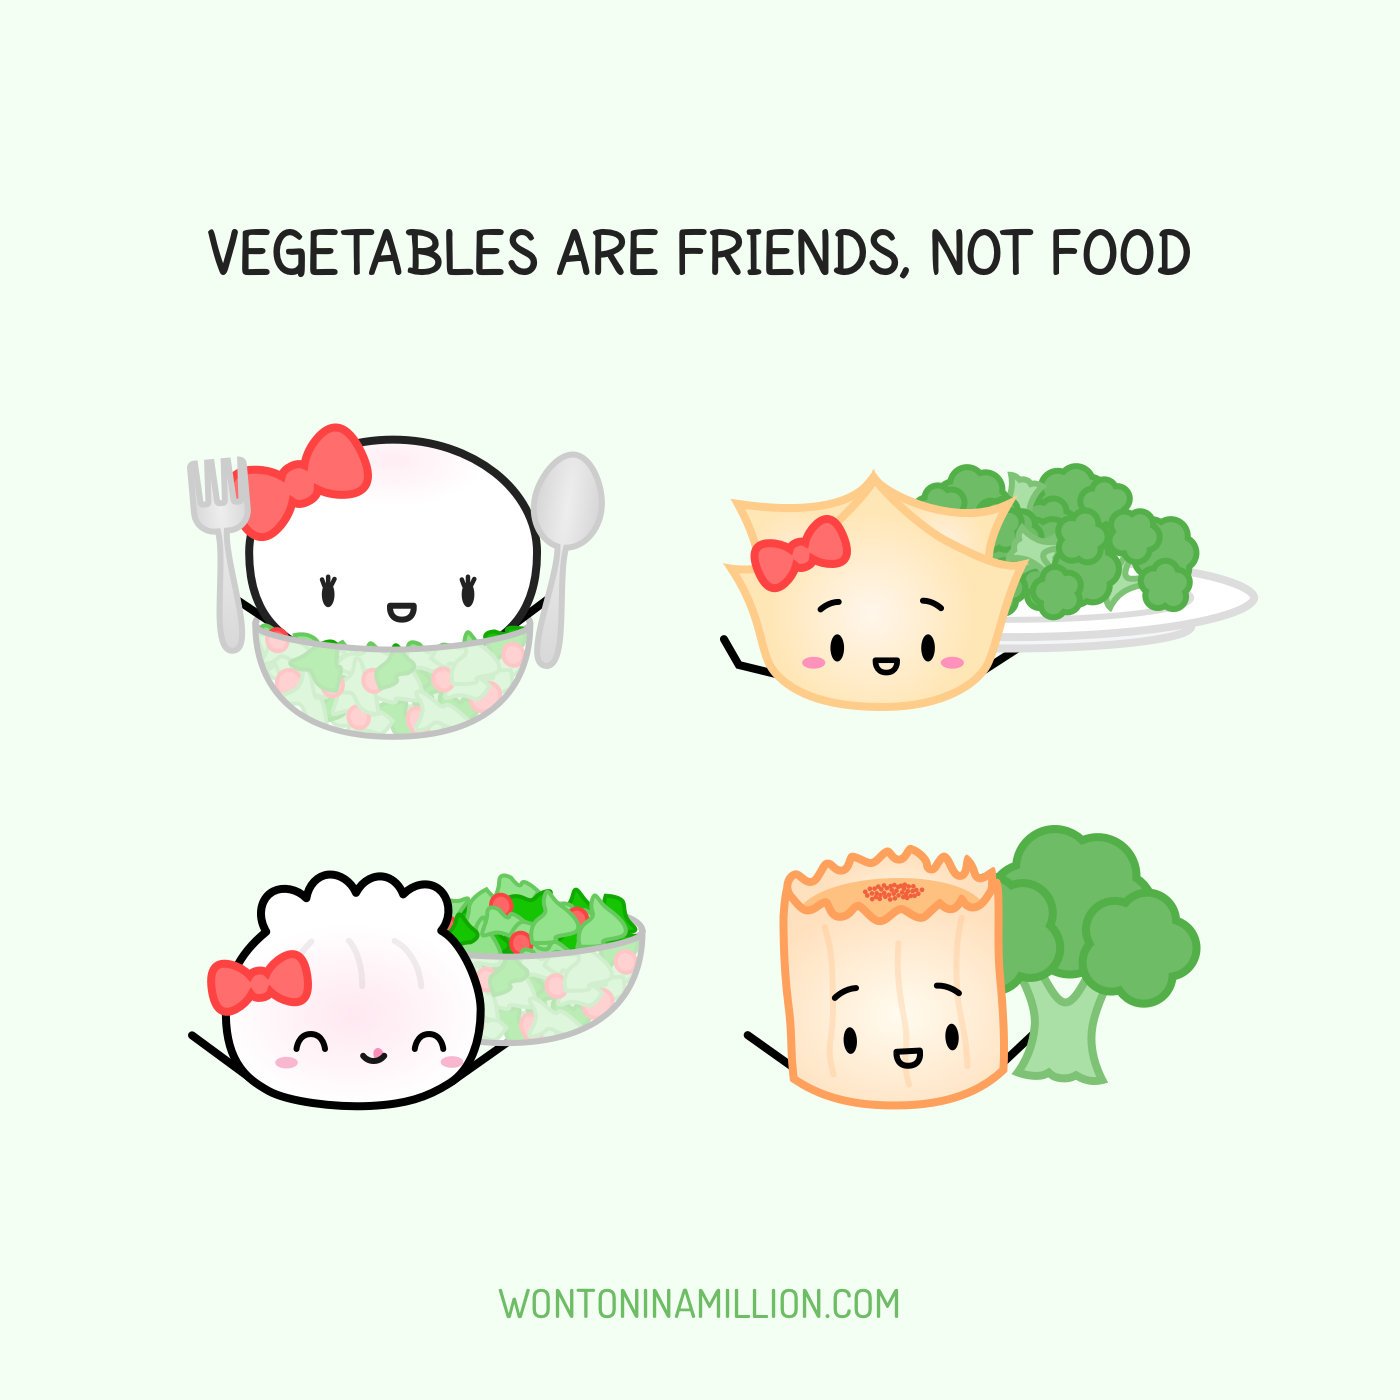 S256 | Healthy Eating Stickers